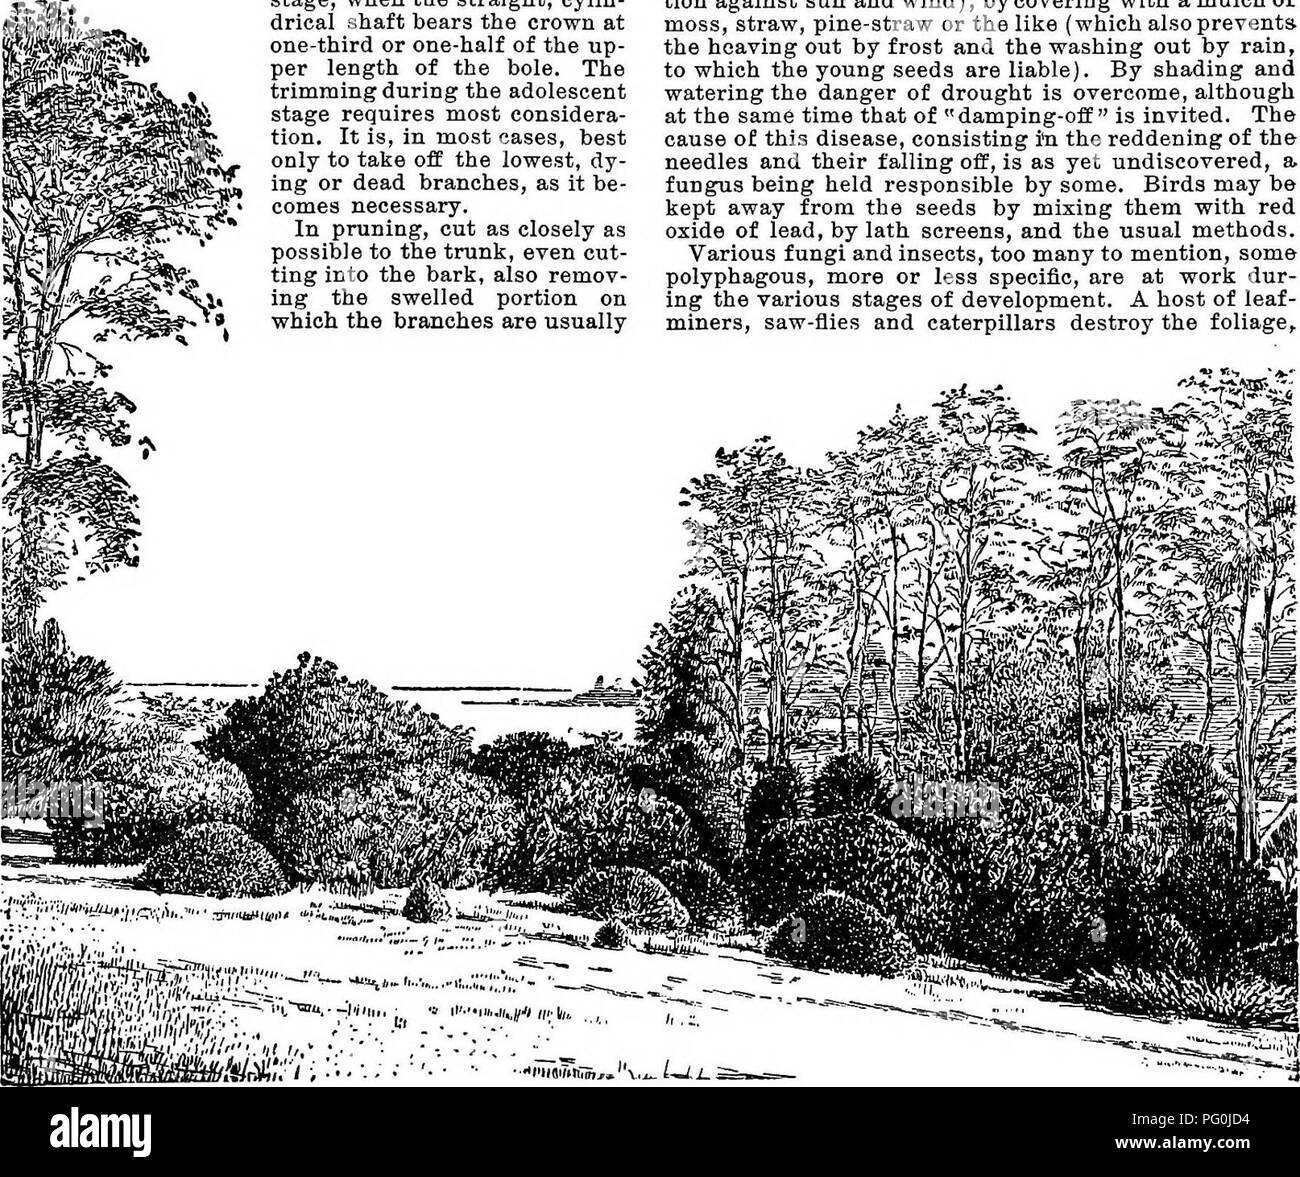 . Cyclopedia of American horticulture, comprising suggestions for cultivation of horticultural plants, descriptions of the species of fruits, vegetables, flowers, and ornamental plants sold in the United States and Canada, together with geographical and biographical sketches. Gardening. 535. Pyramidal evergreens. Junipers. Trimming off a few tiers of lower branches, loosening the soil as far as the ambitus of the crown, and mulch- ing will largely correct this. When used for hedges, the treatment is, of course, different. For such a purpose the shade-enduring species, spruces and hemlocks, are Stock Photo